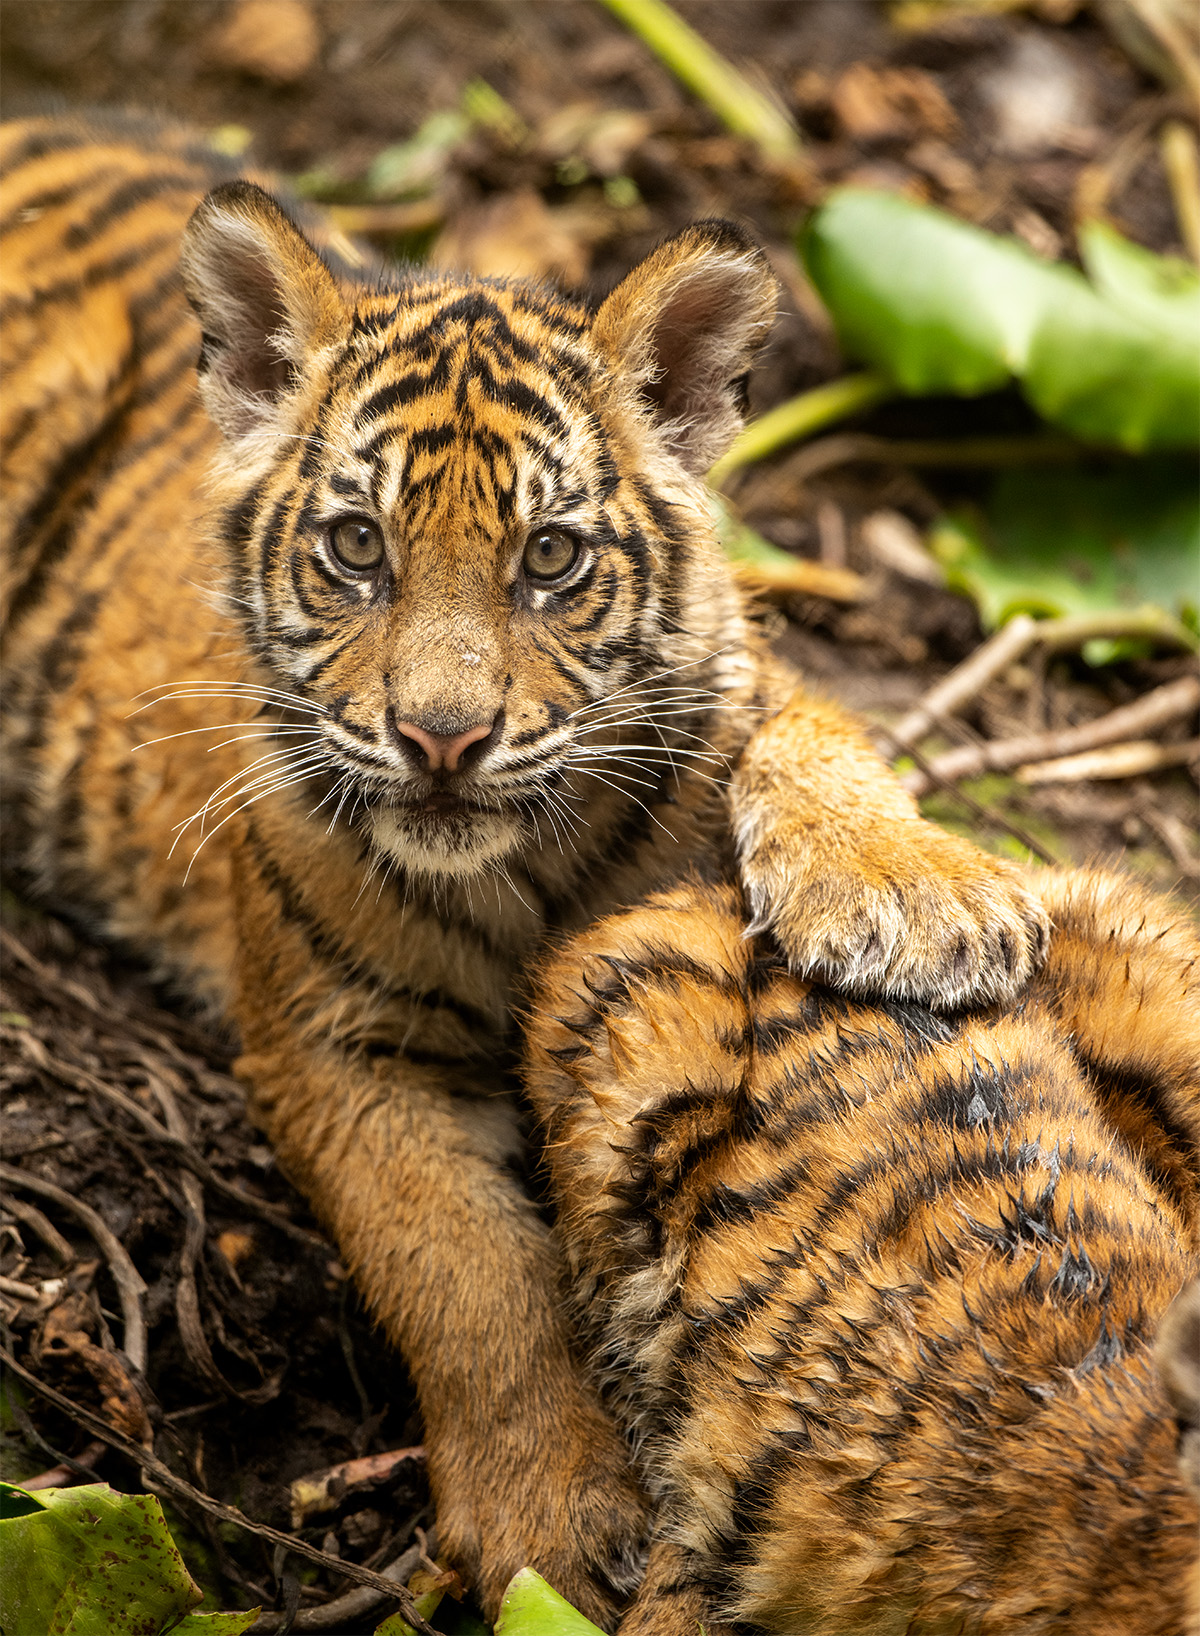 Tiger Cubs at Adelaide Zoo